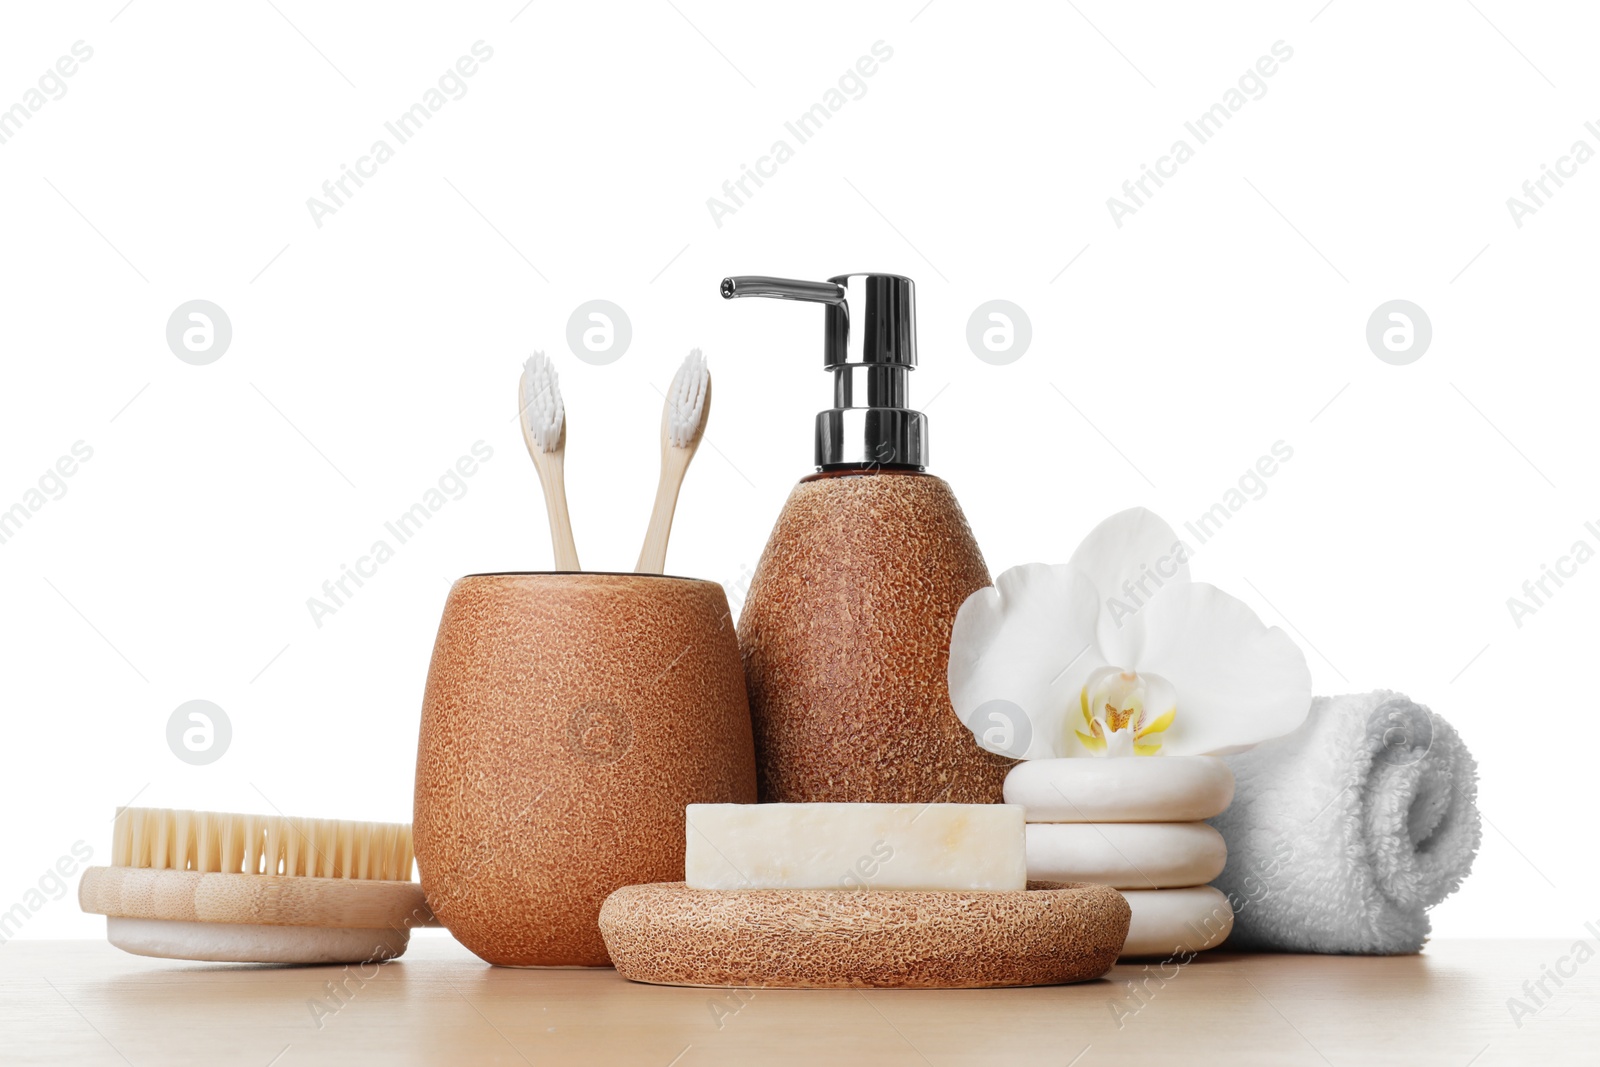 Photo of Bath accessories. Different personal care products and flower on wooden table against white background